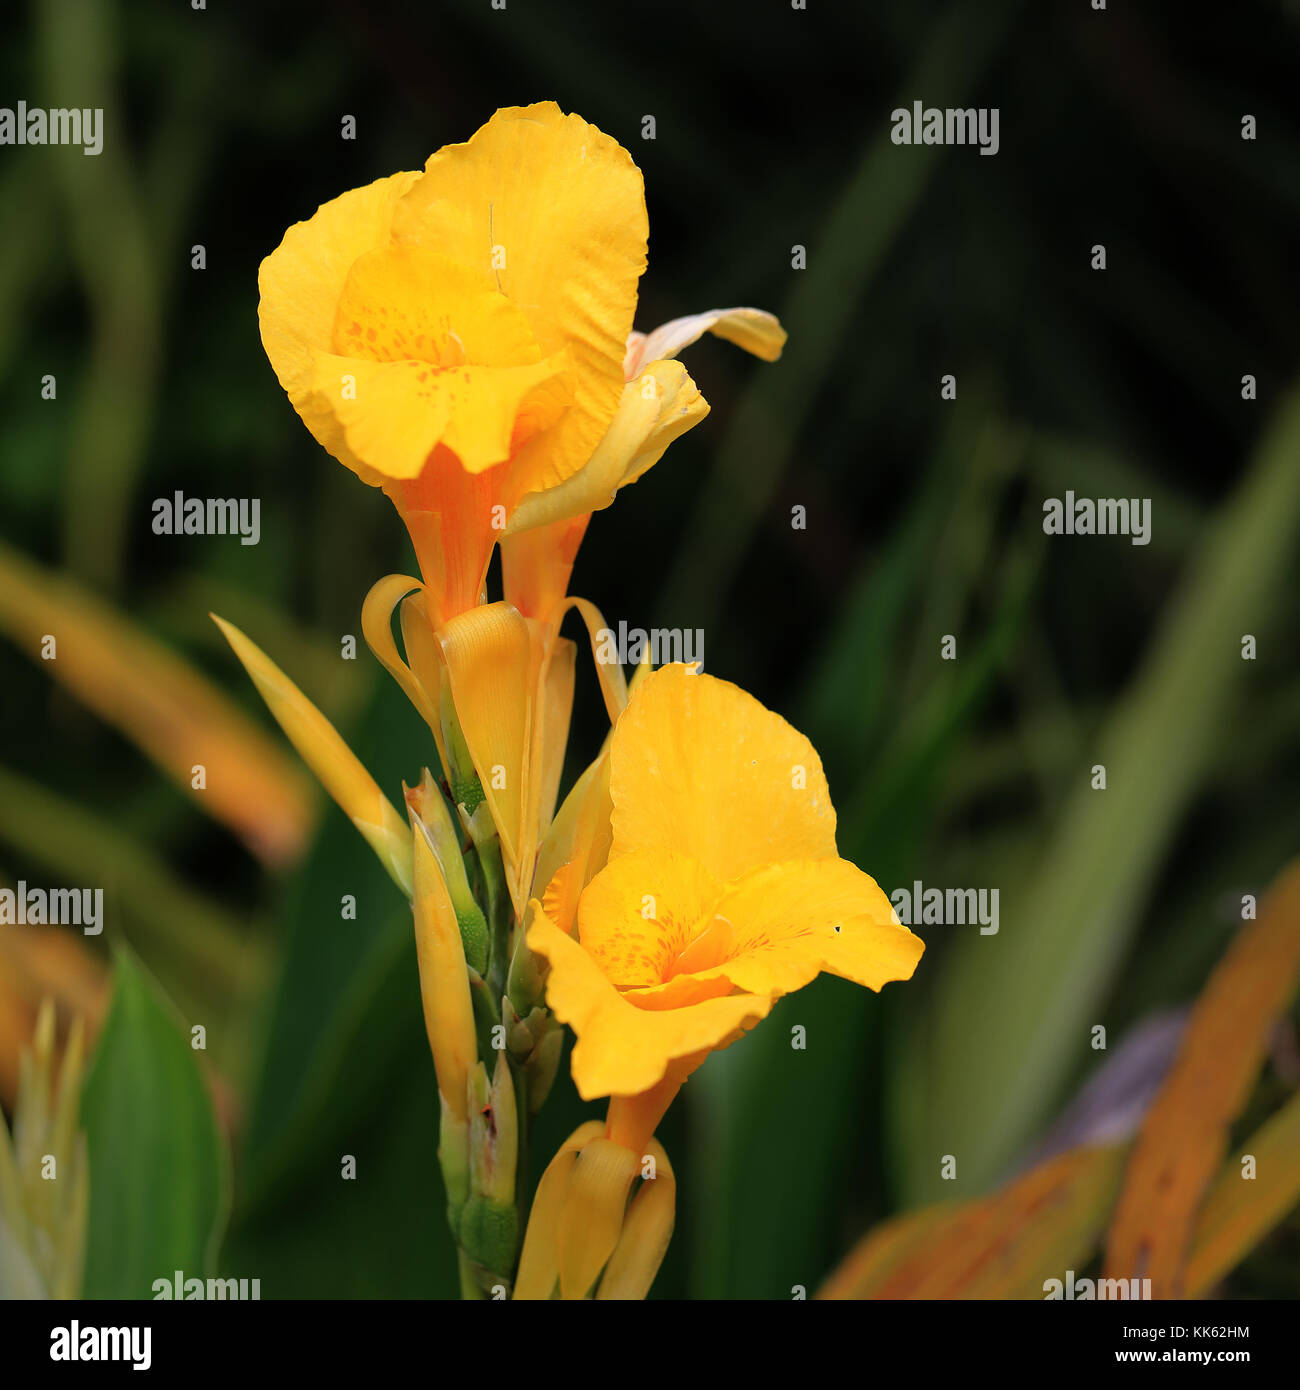 Yellow Canna Lily flowers. Stock Photo